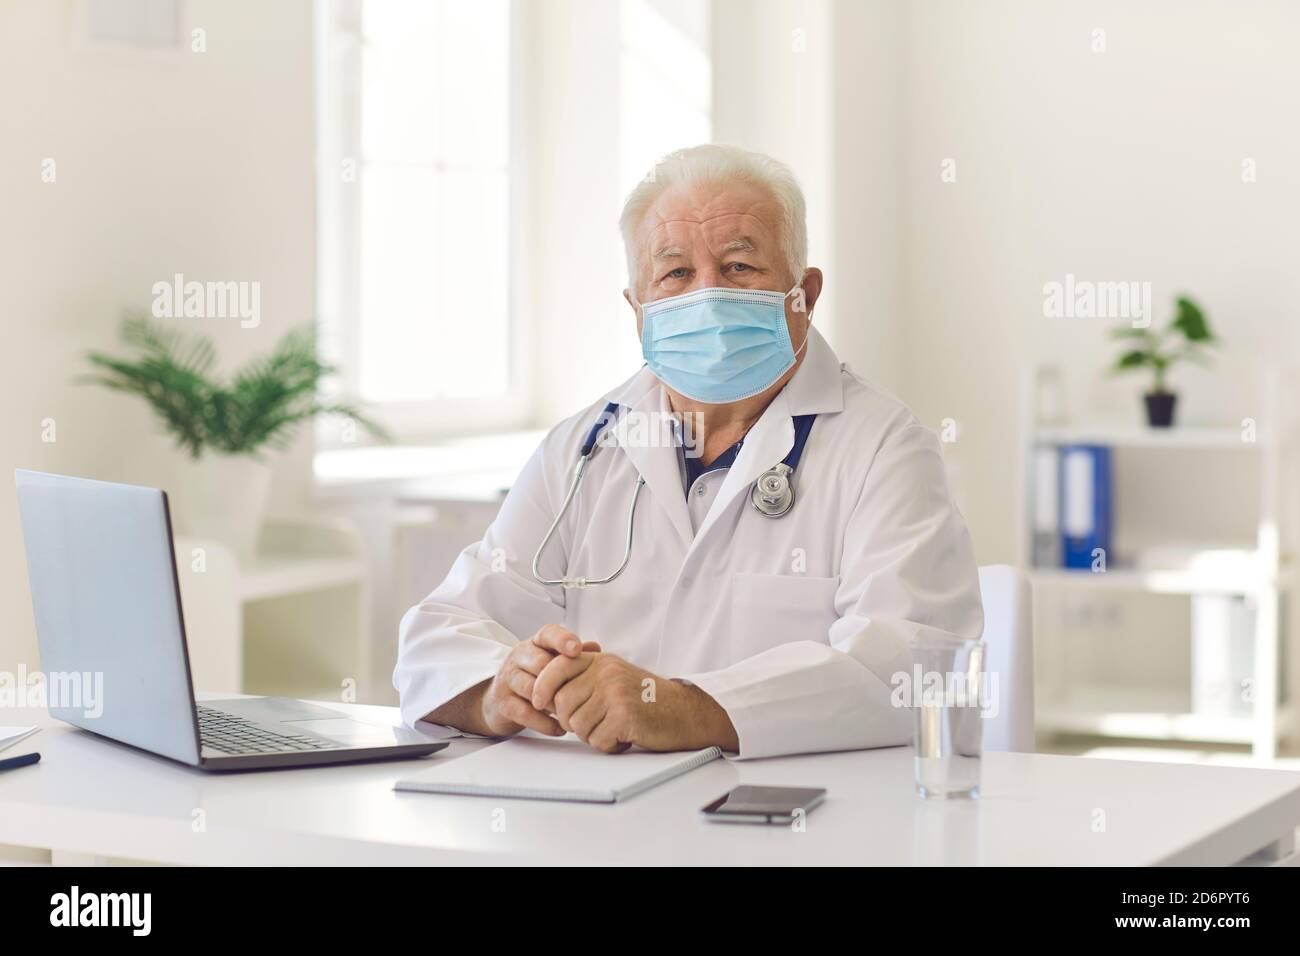 Senior experienced doctor in uniform sitting near laptop during videocall and online meeting Stock Photo